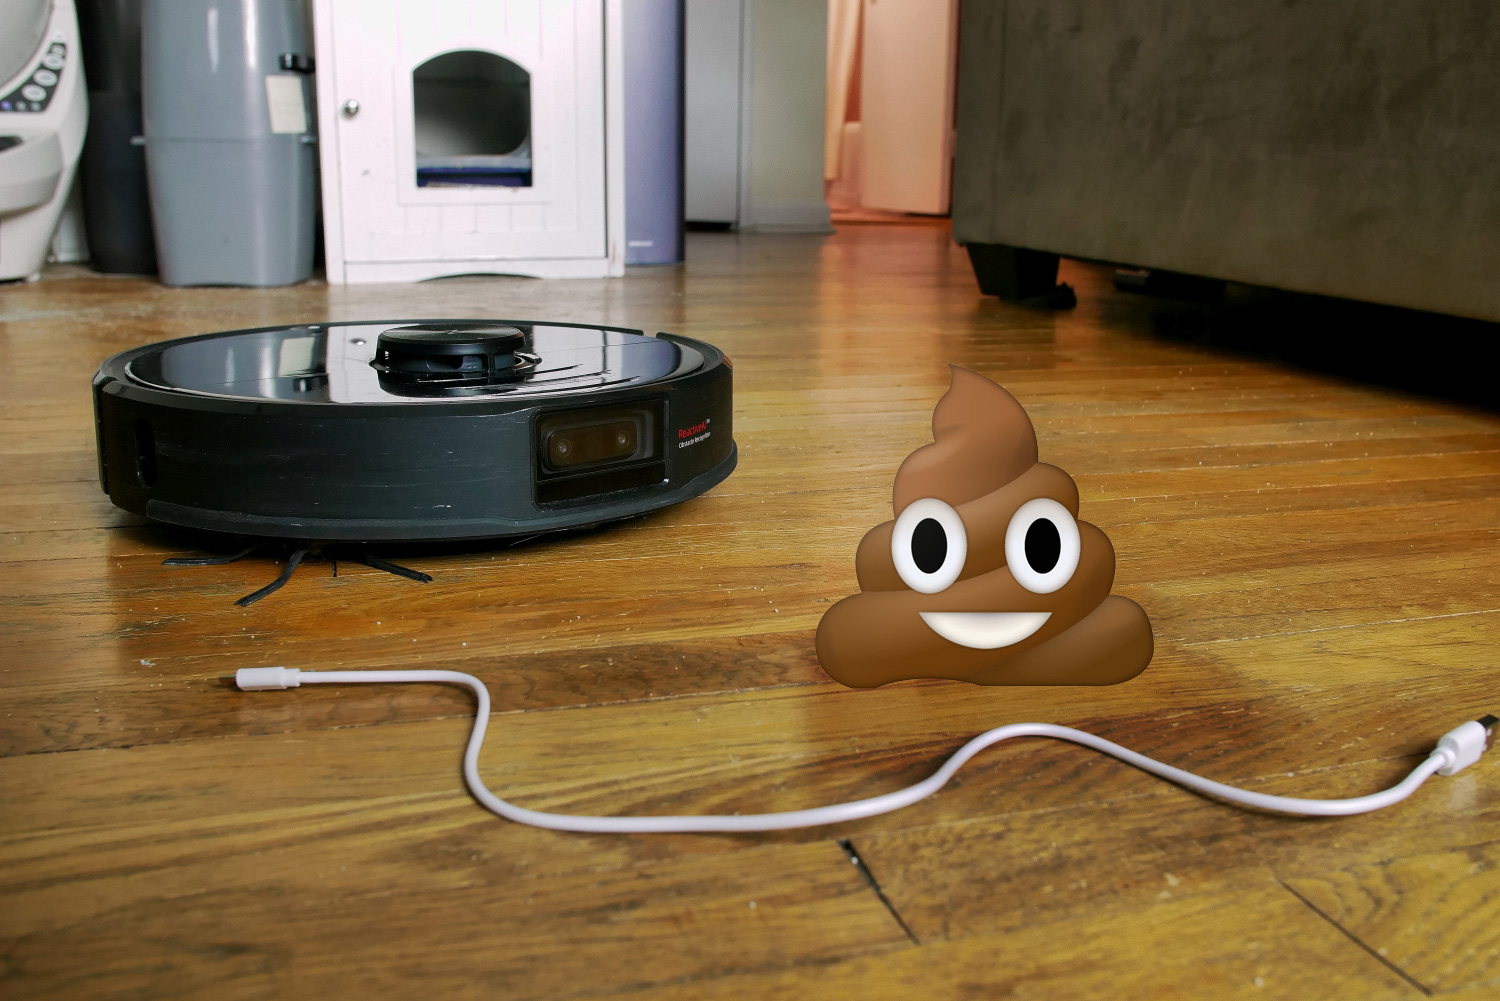 Dodging Wires the Holy Grail of Robot Vacuum Avoidance Digital